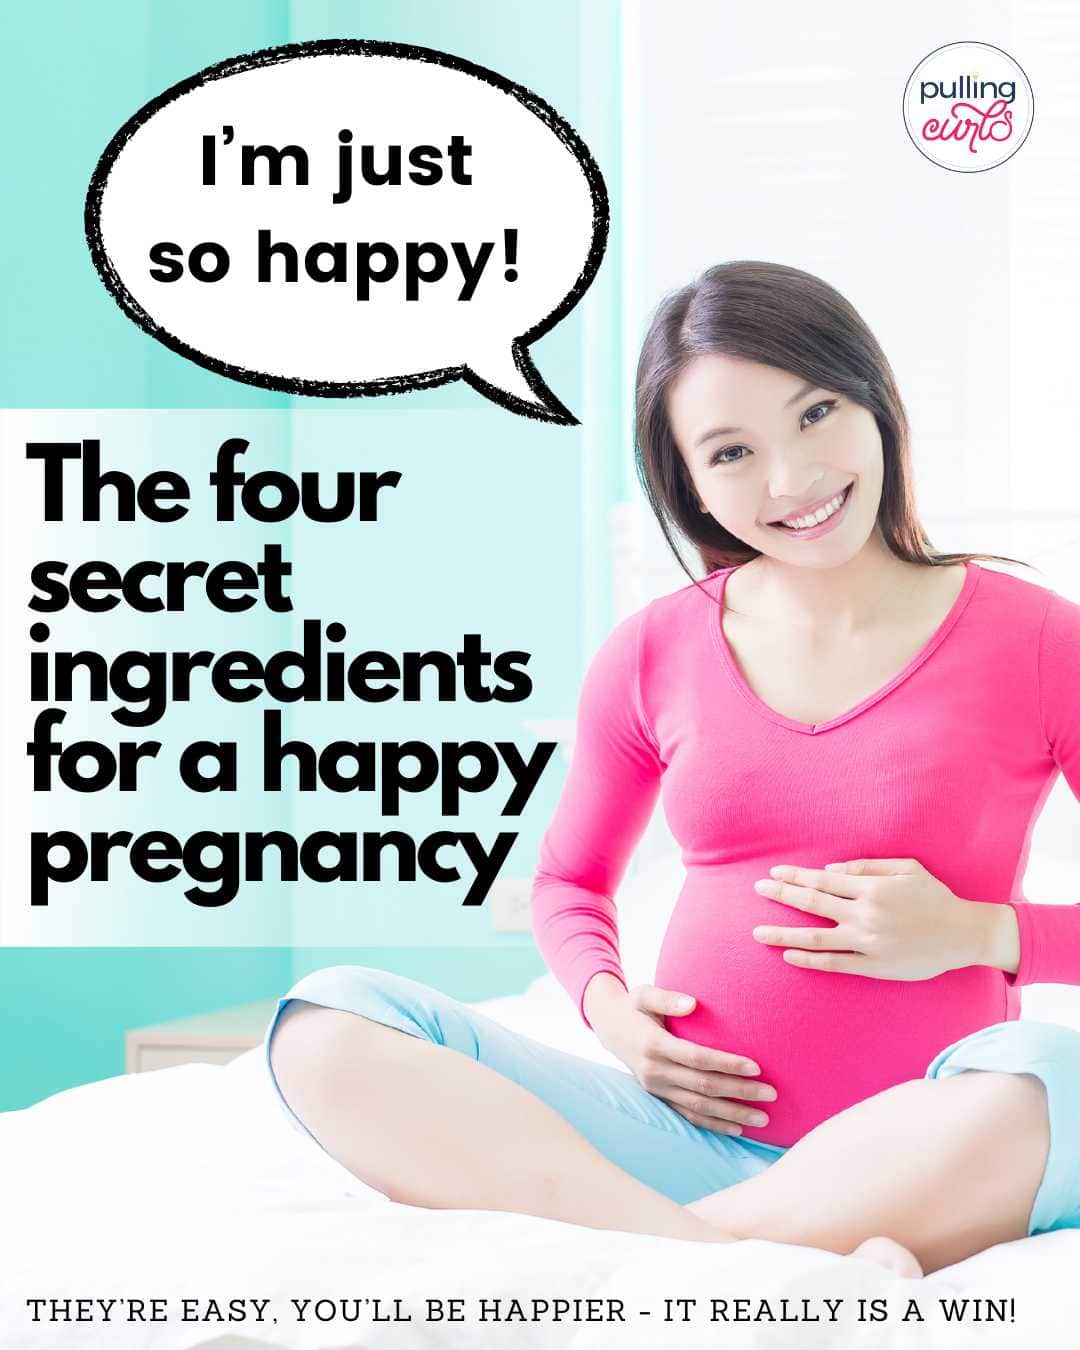 Discover the top 💖 habits of a happy pregnancy! Learn how to relax, nourish yourself, and enjoy your growing bump. 🤰 From morning routines to prenatal yoga, we've got you covered! 😊 via @pullingcurls